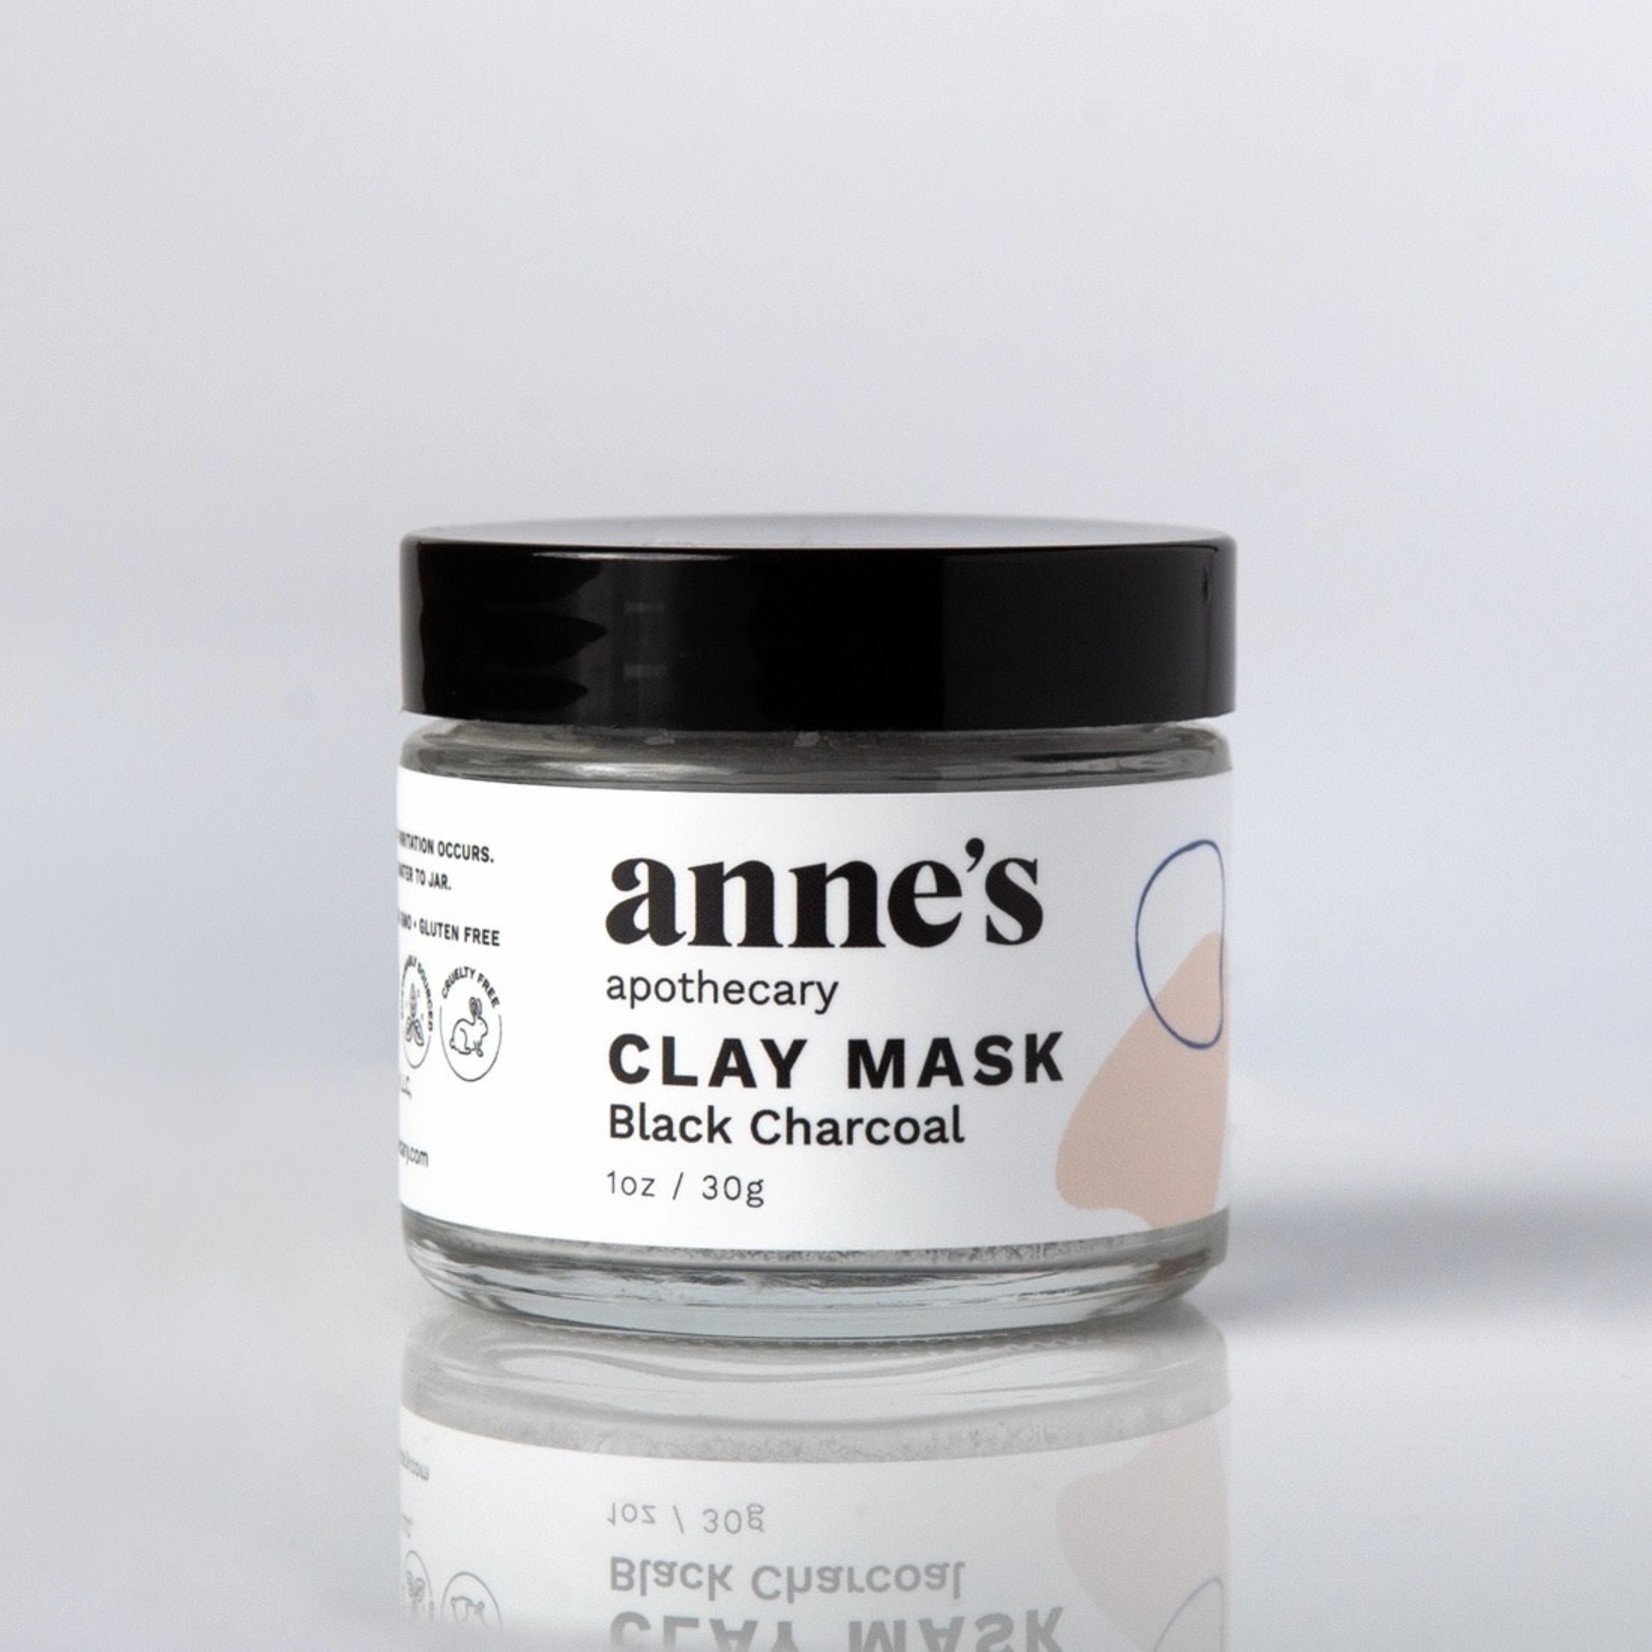 Annes Apothecary Mask